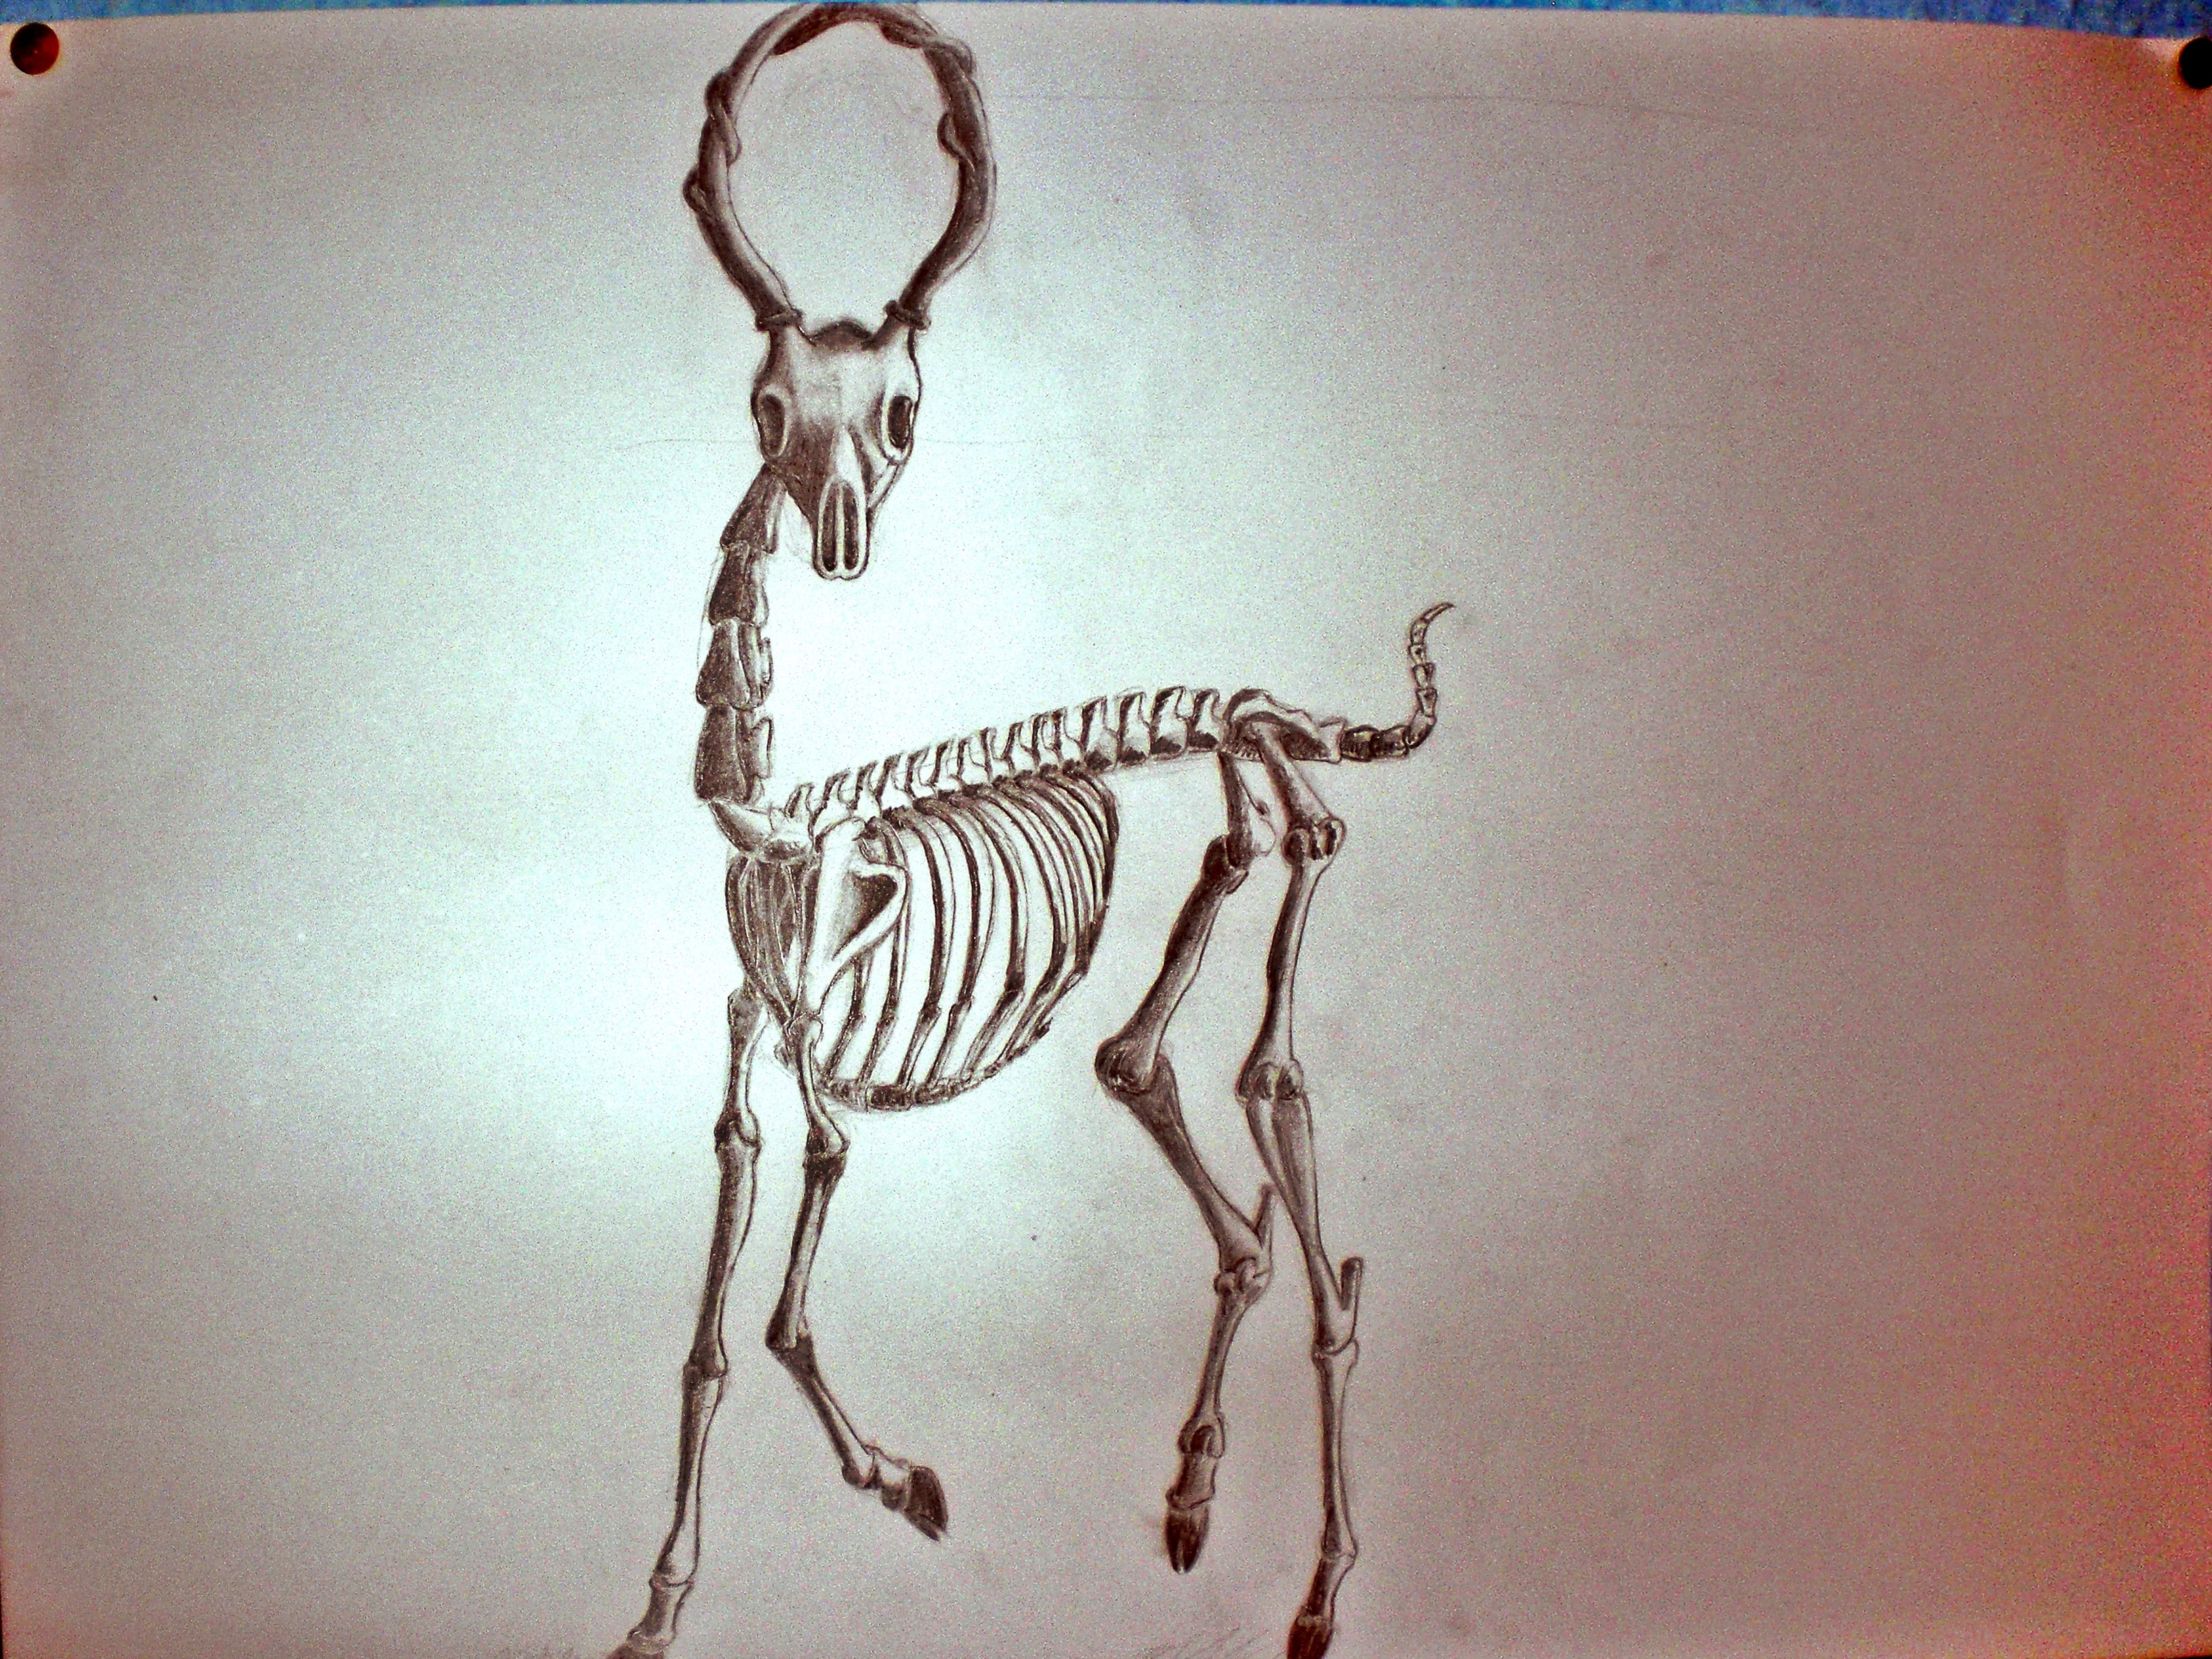 The Original Rehgräten: My old drawing of a deer-skeleton with its antlers braided to a ring